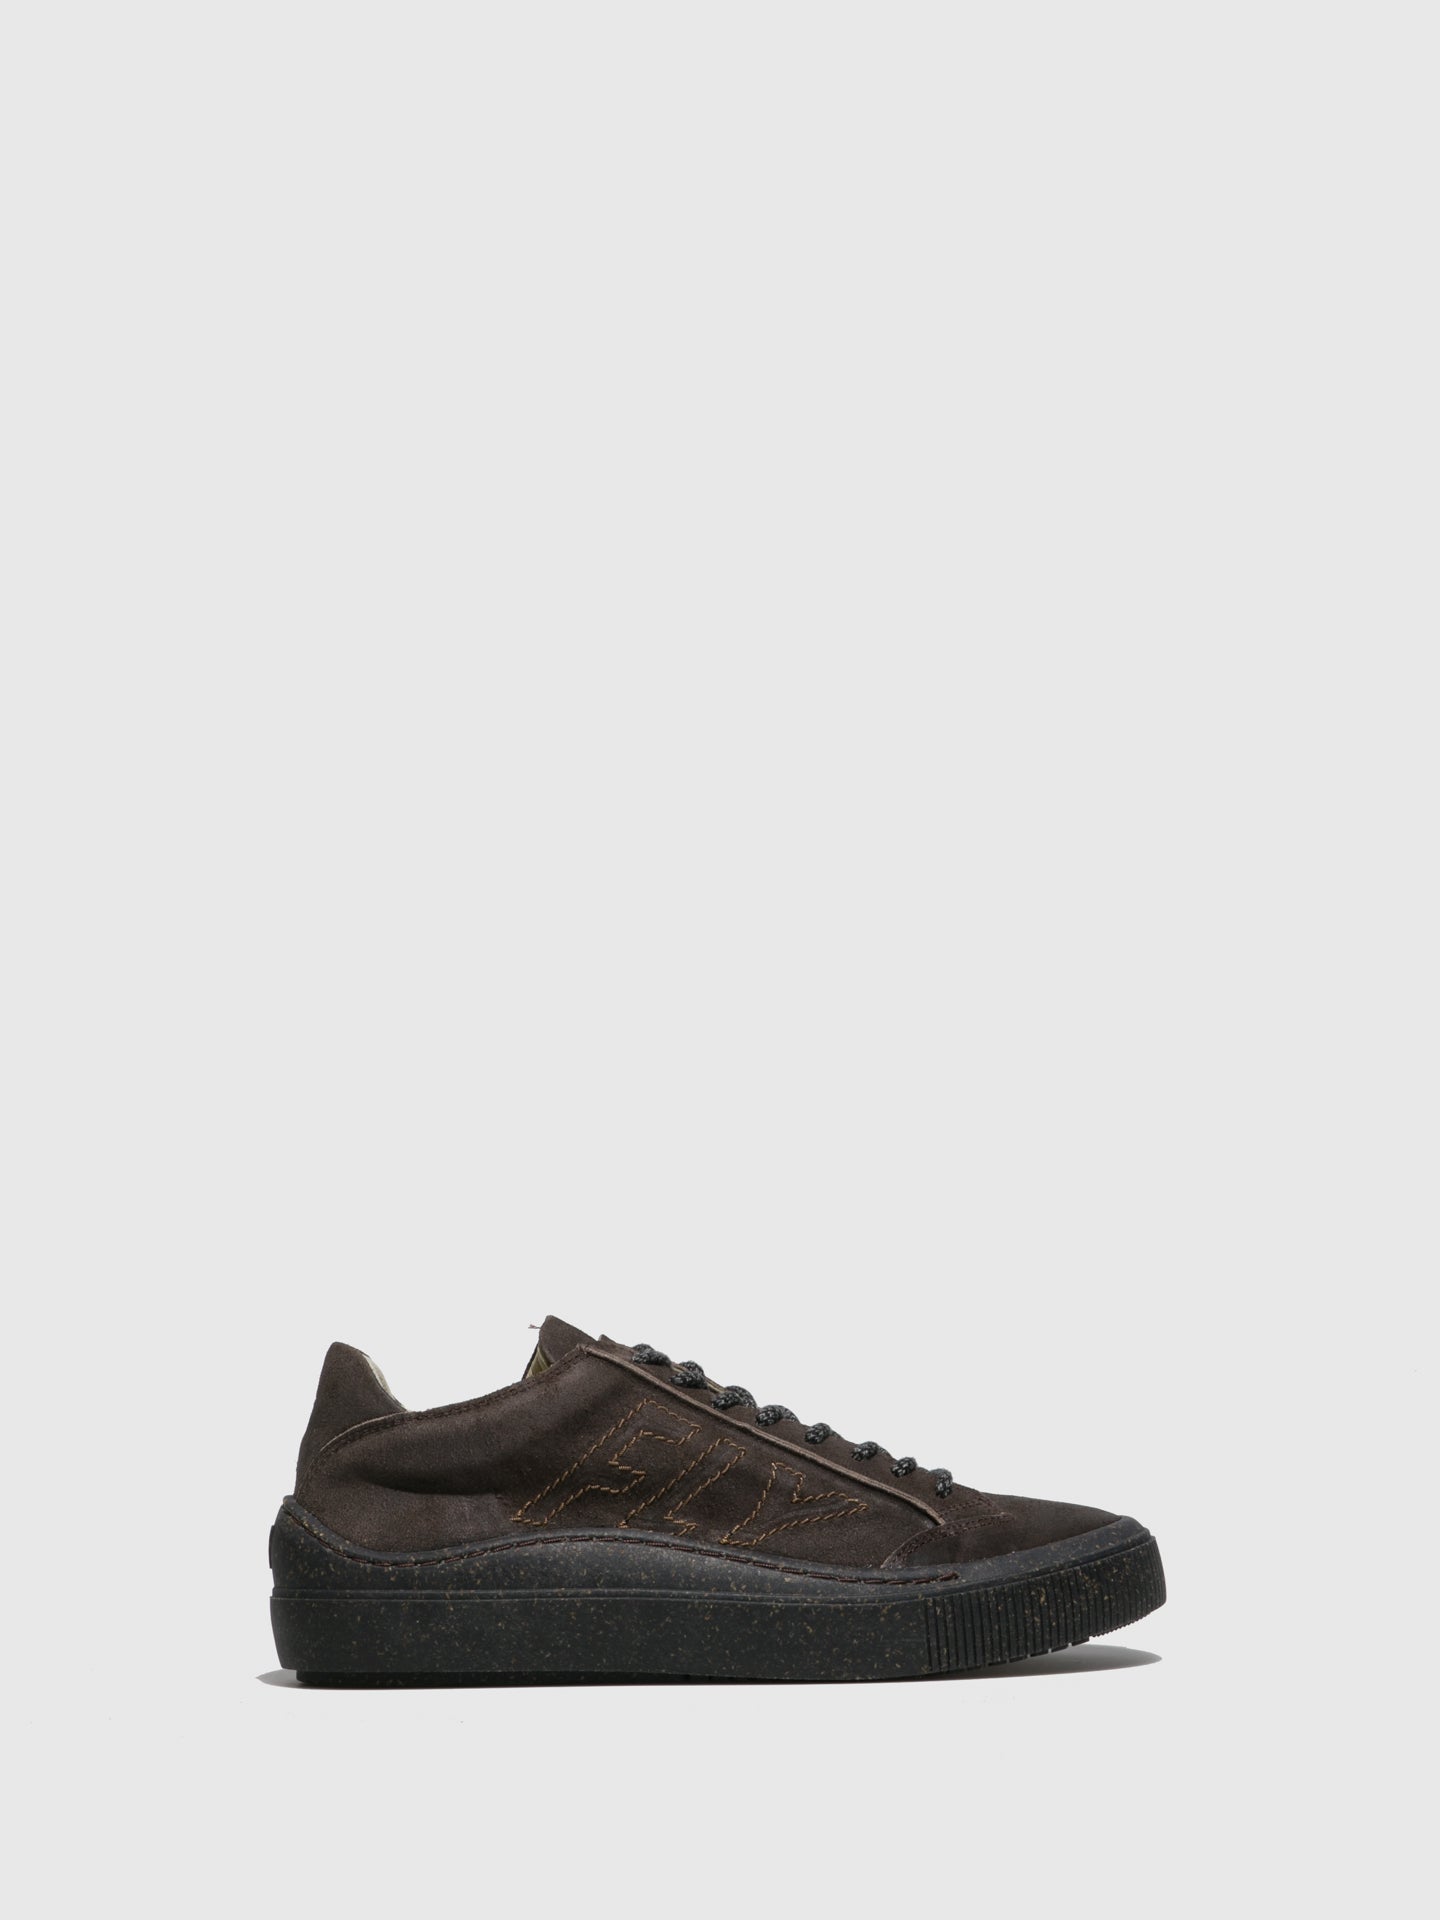 Fly London Lace-up Trainers SEPA355FLY SUEDEVEGETALBEAT ASFALT